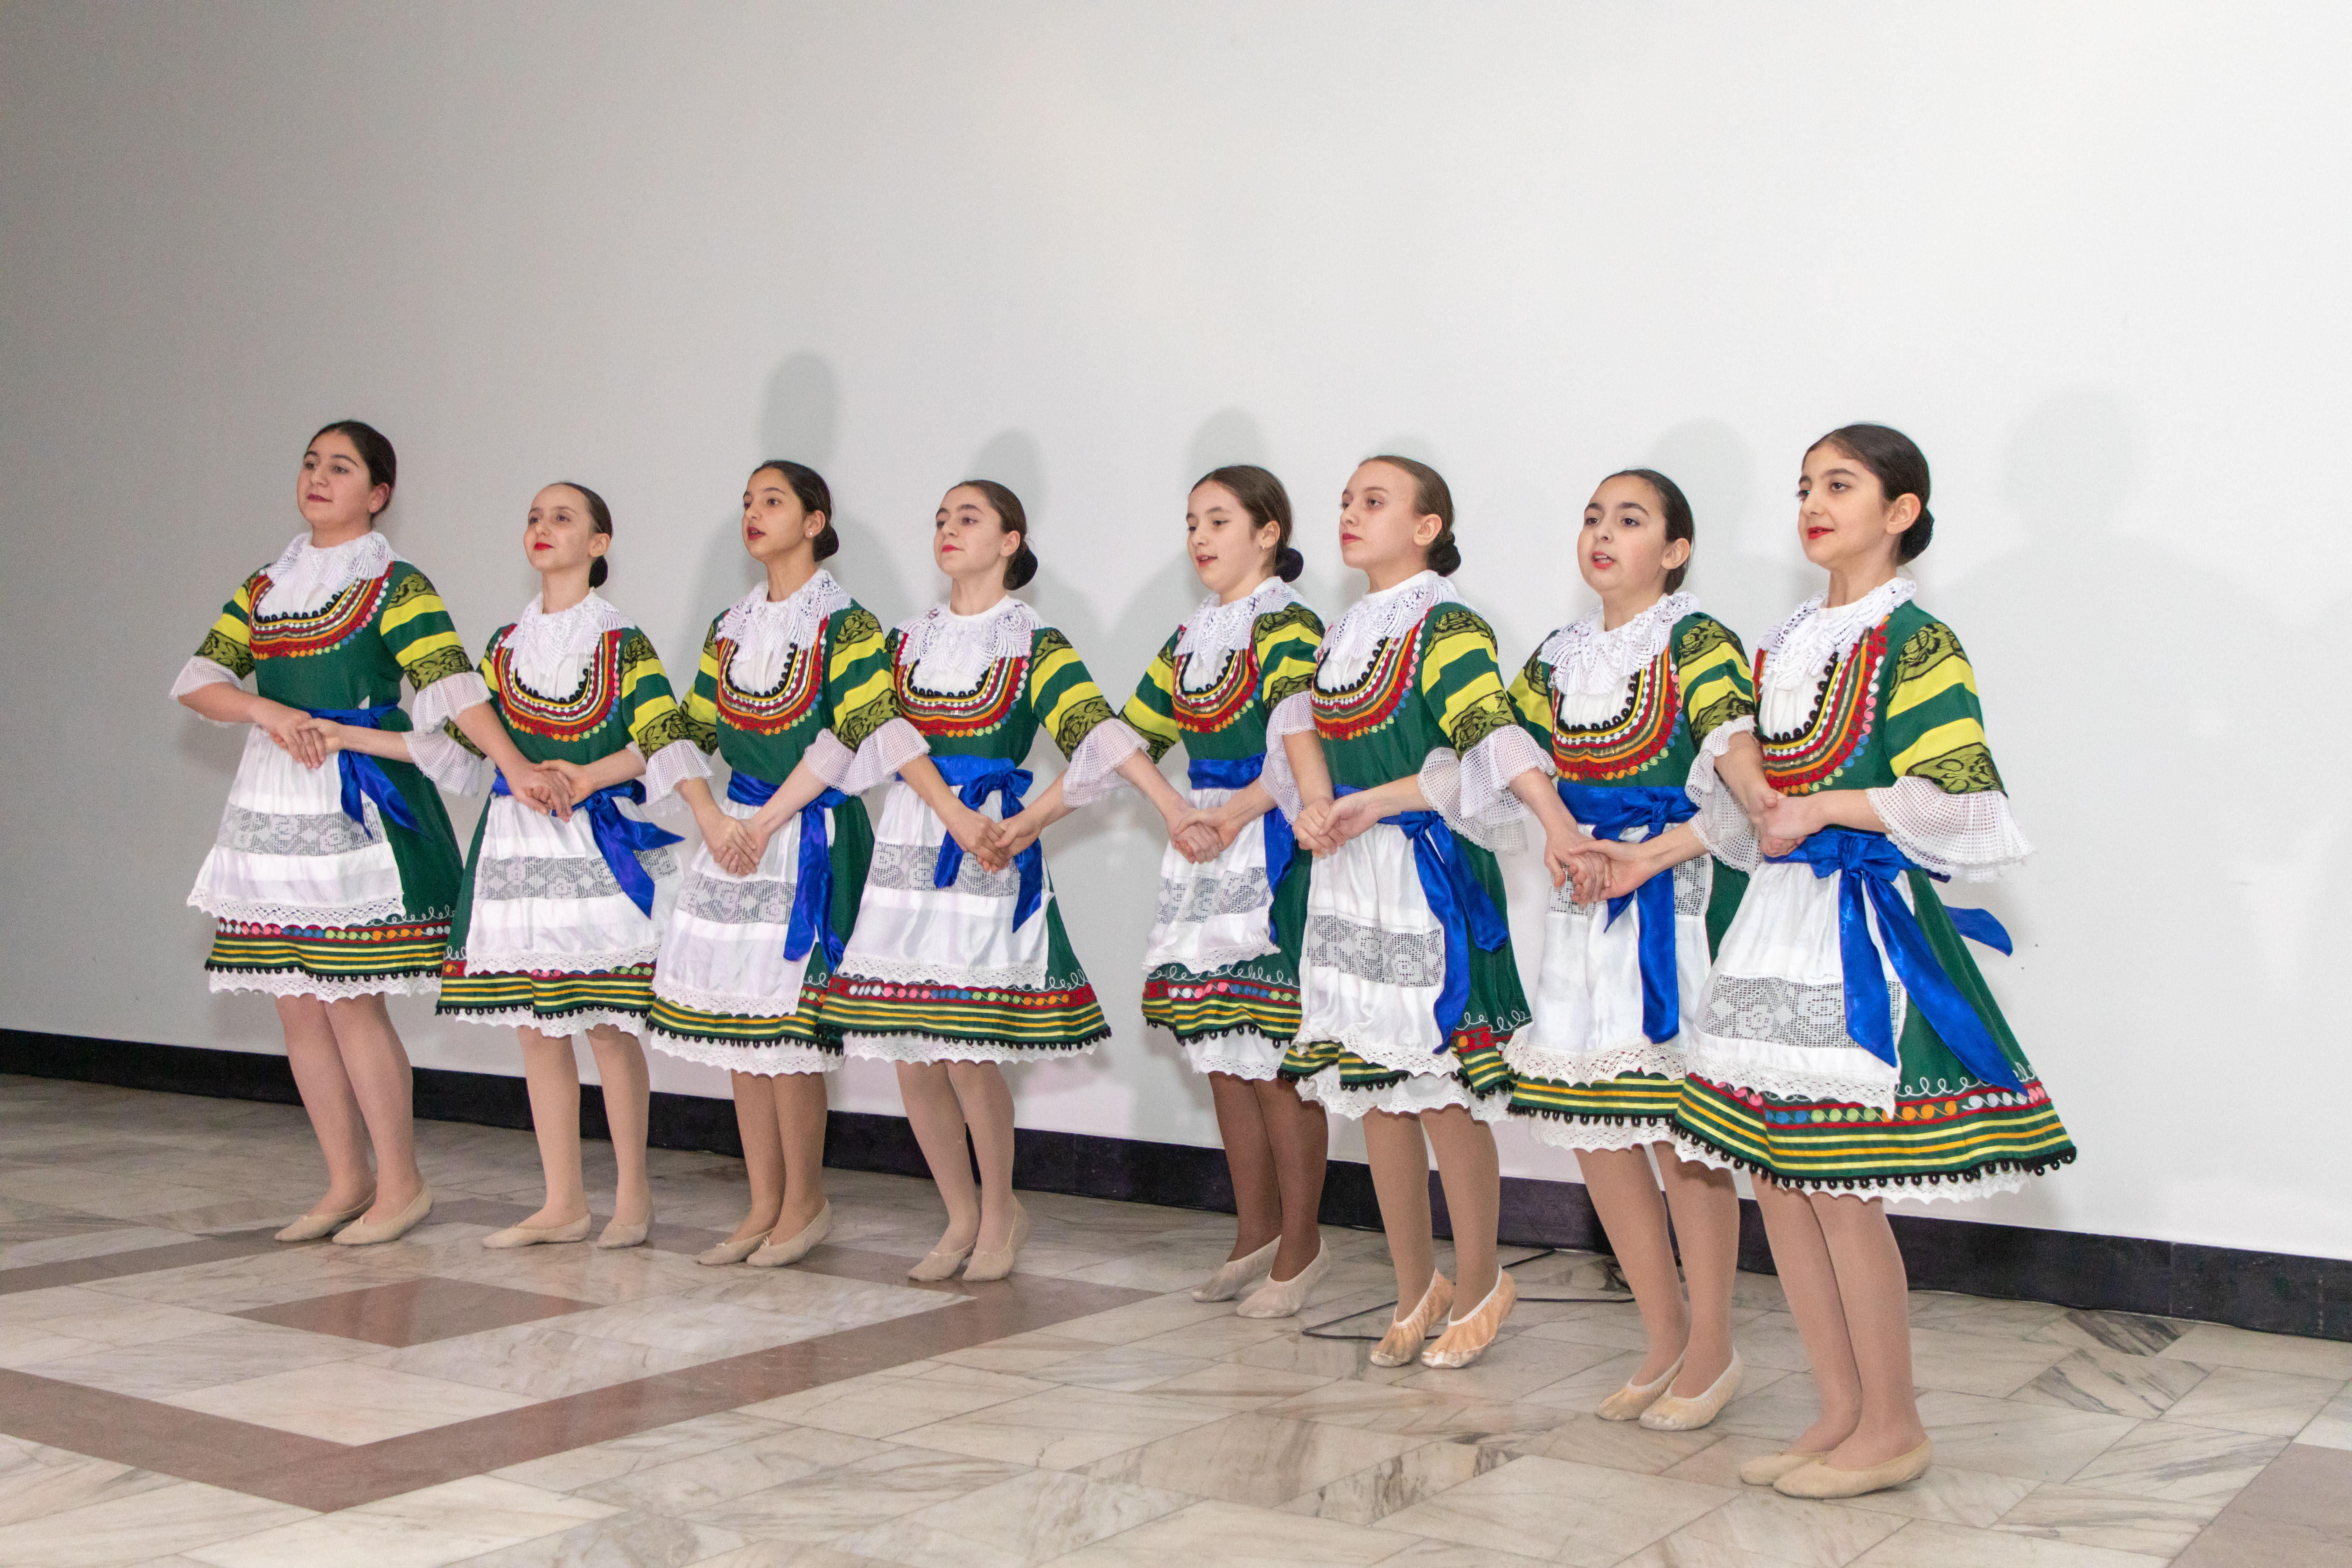 Bulgaria's Liberation from the Ottoman Empire was celebrated in the ceremonial hall of the National Polytechnic University of Armenia